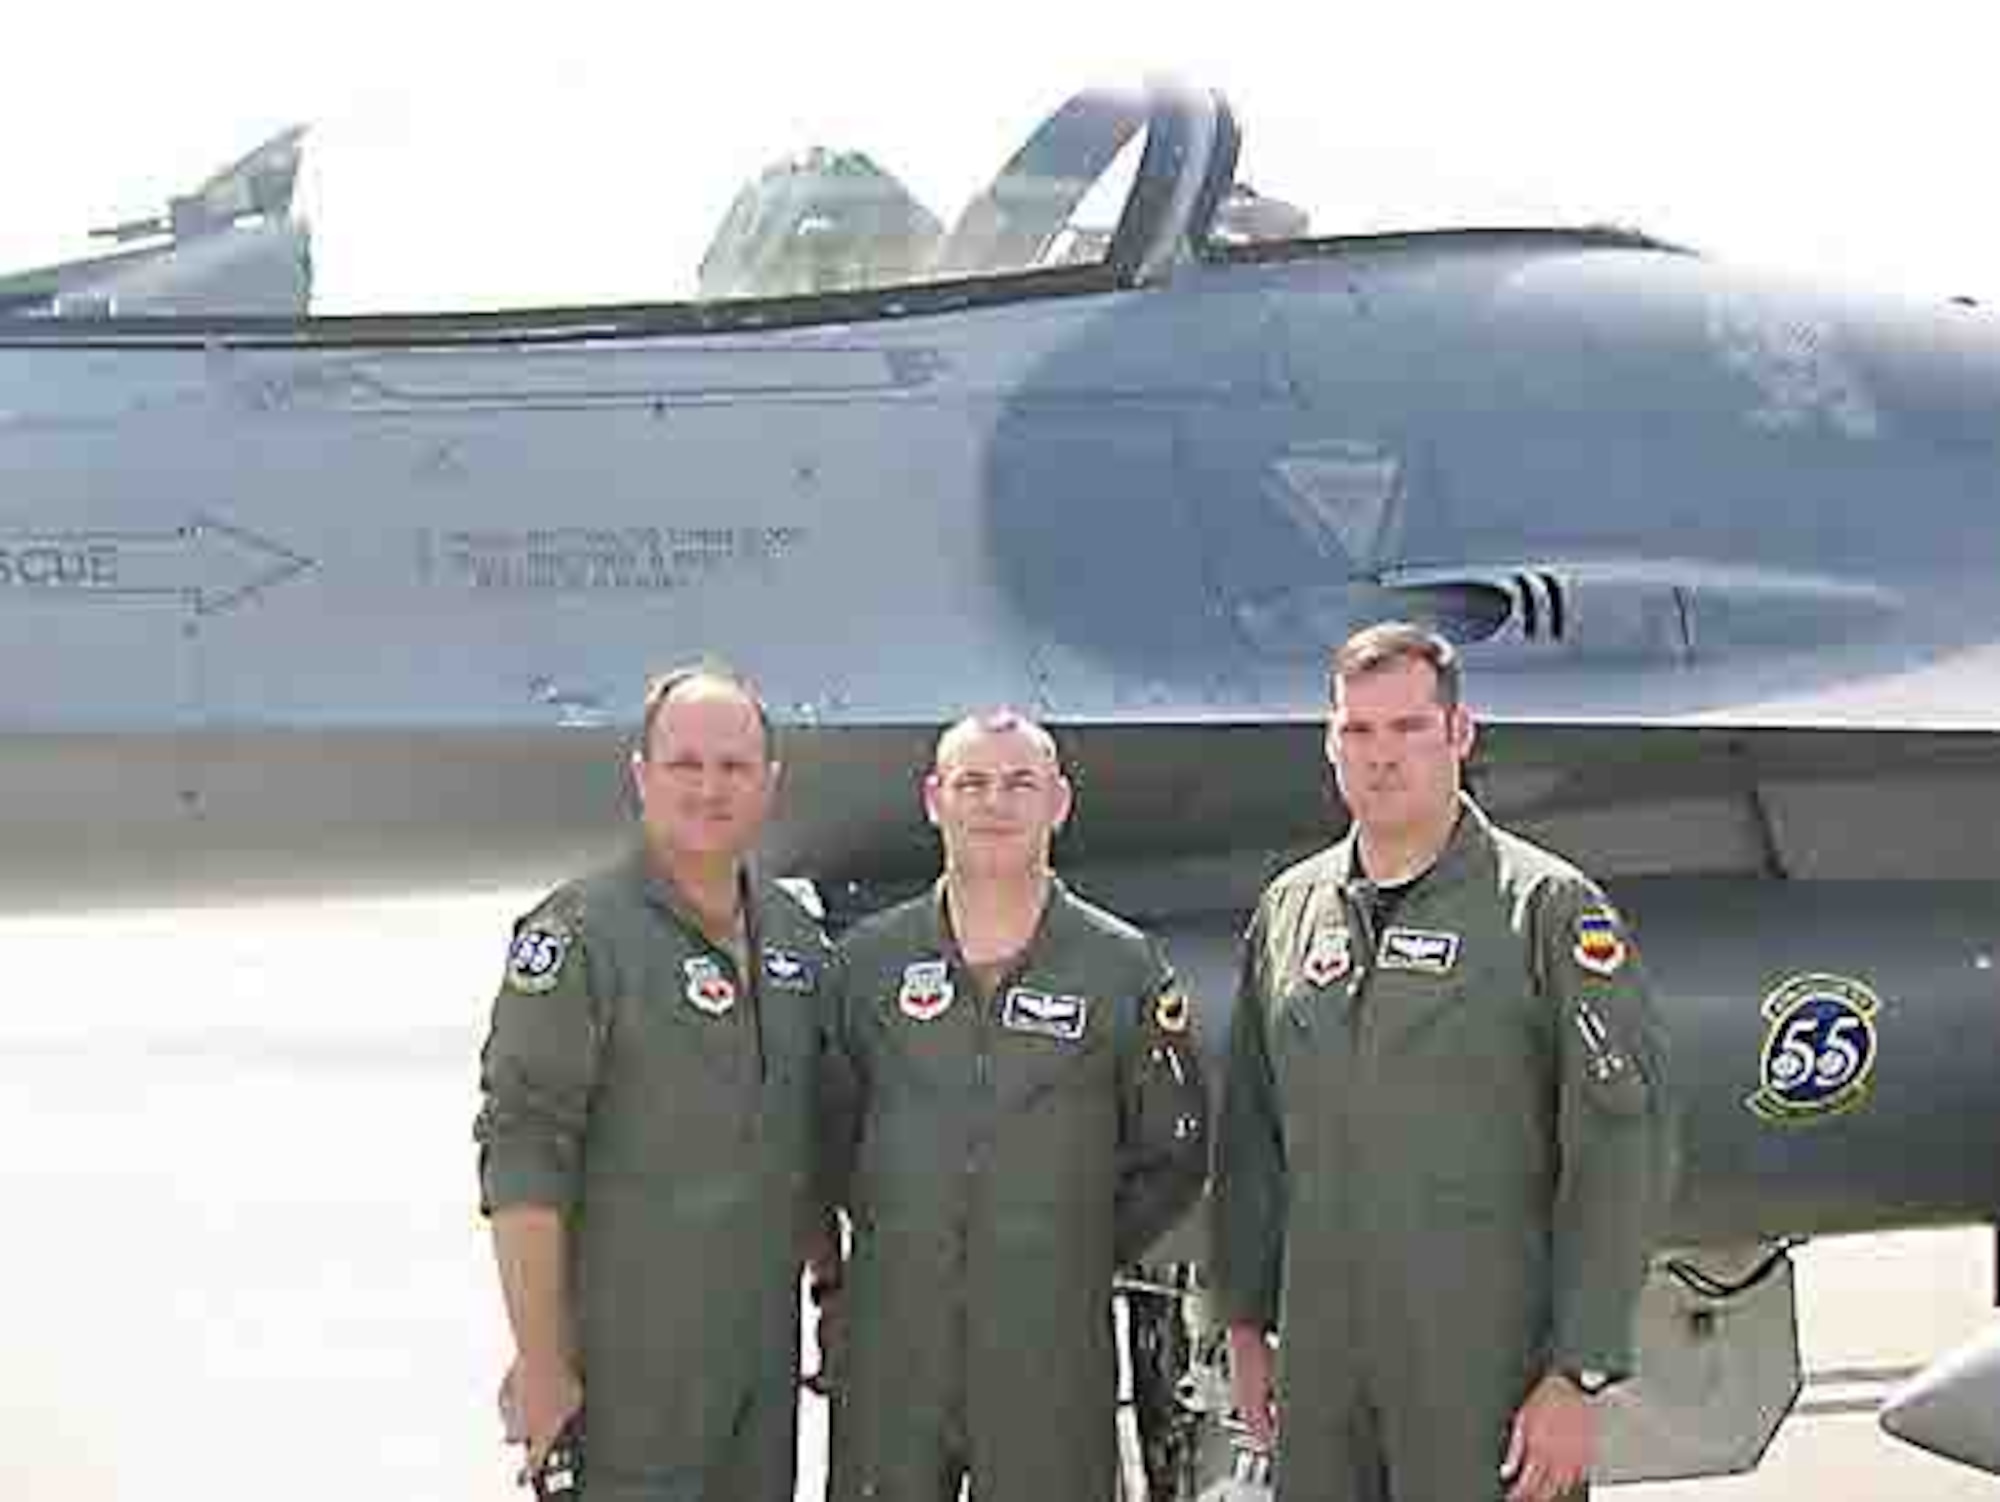 From left, Maj. Doug Schaare, Lt. Col. Thomas Littleton and Capt. Craig Simmons, 55th FS pilots, recently received the Air Crew of Distinction Award from Air Combat Command.  (Courtesy photo)